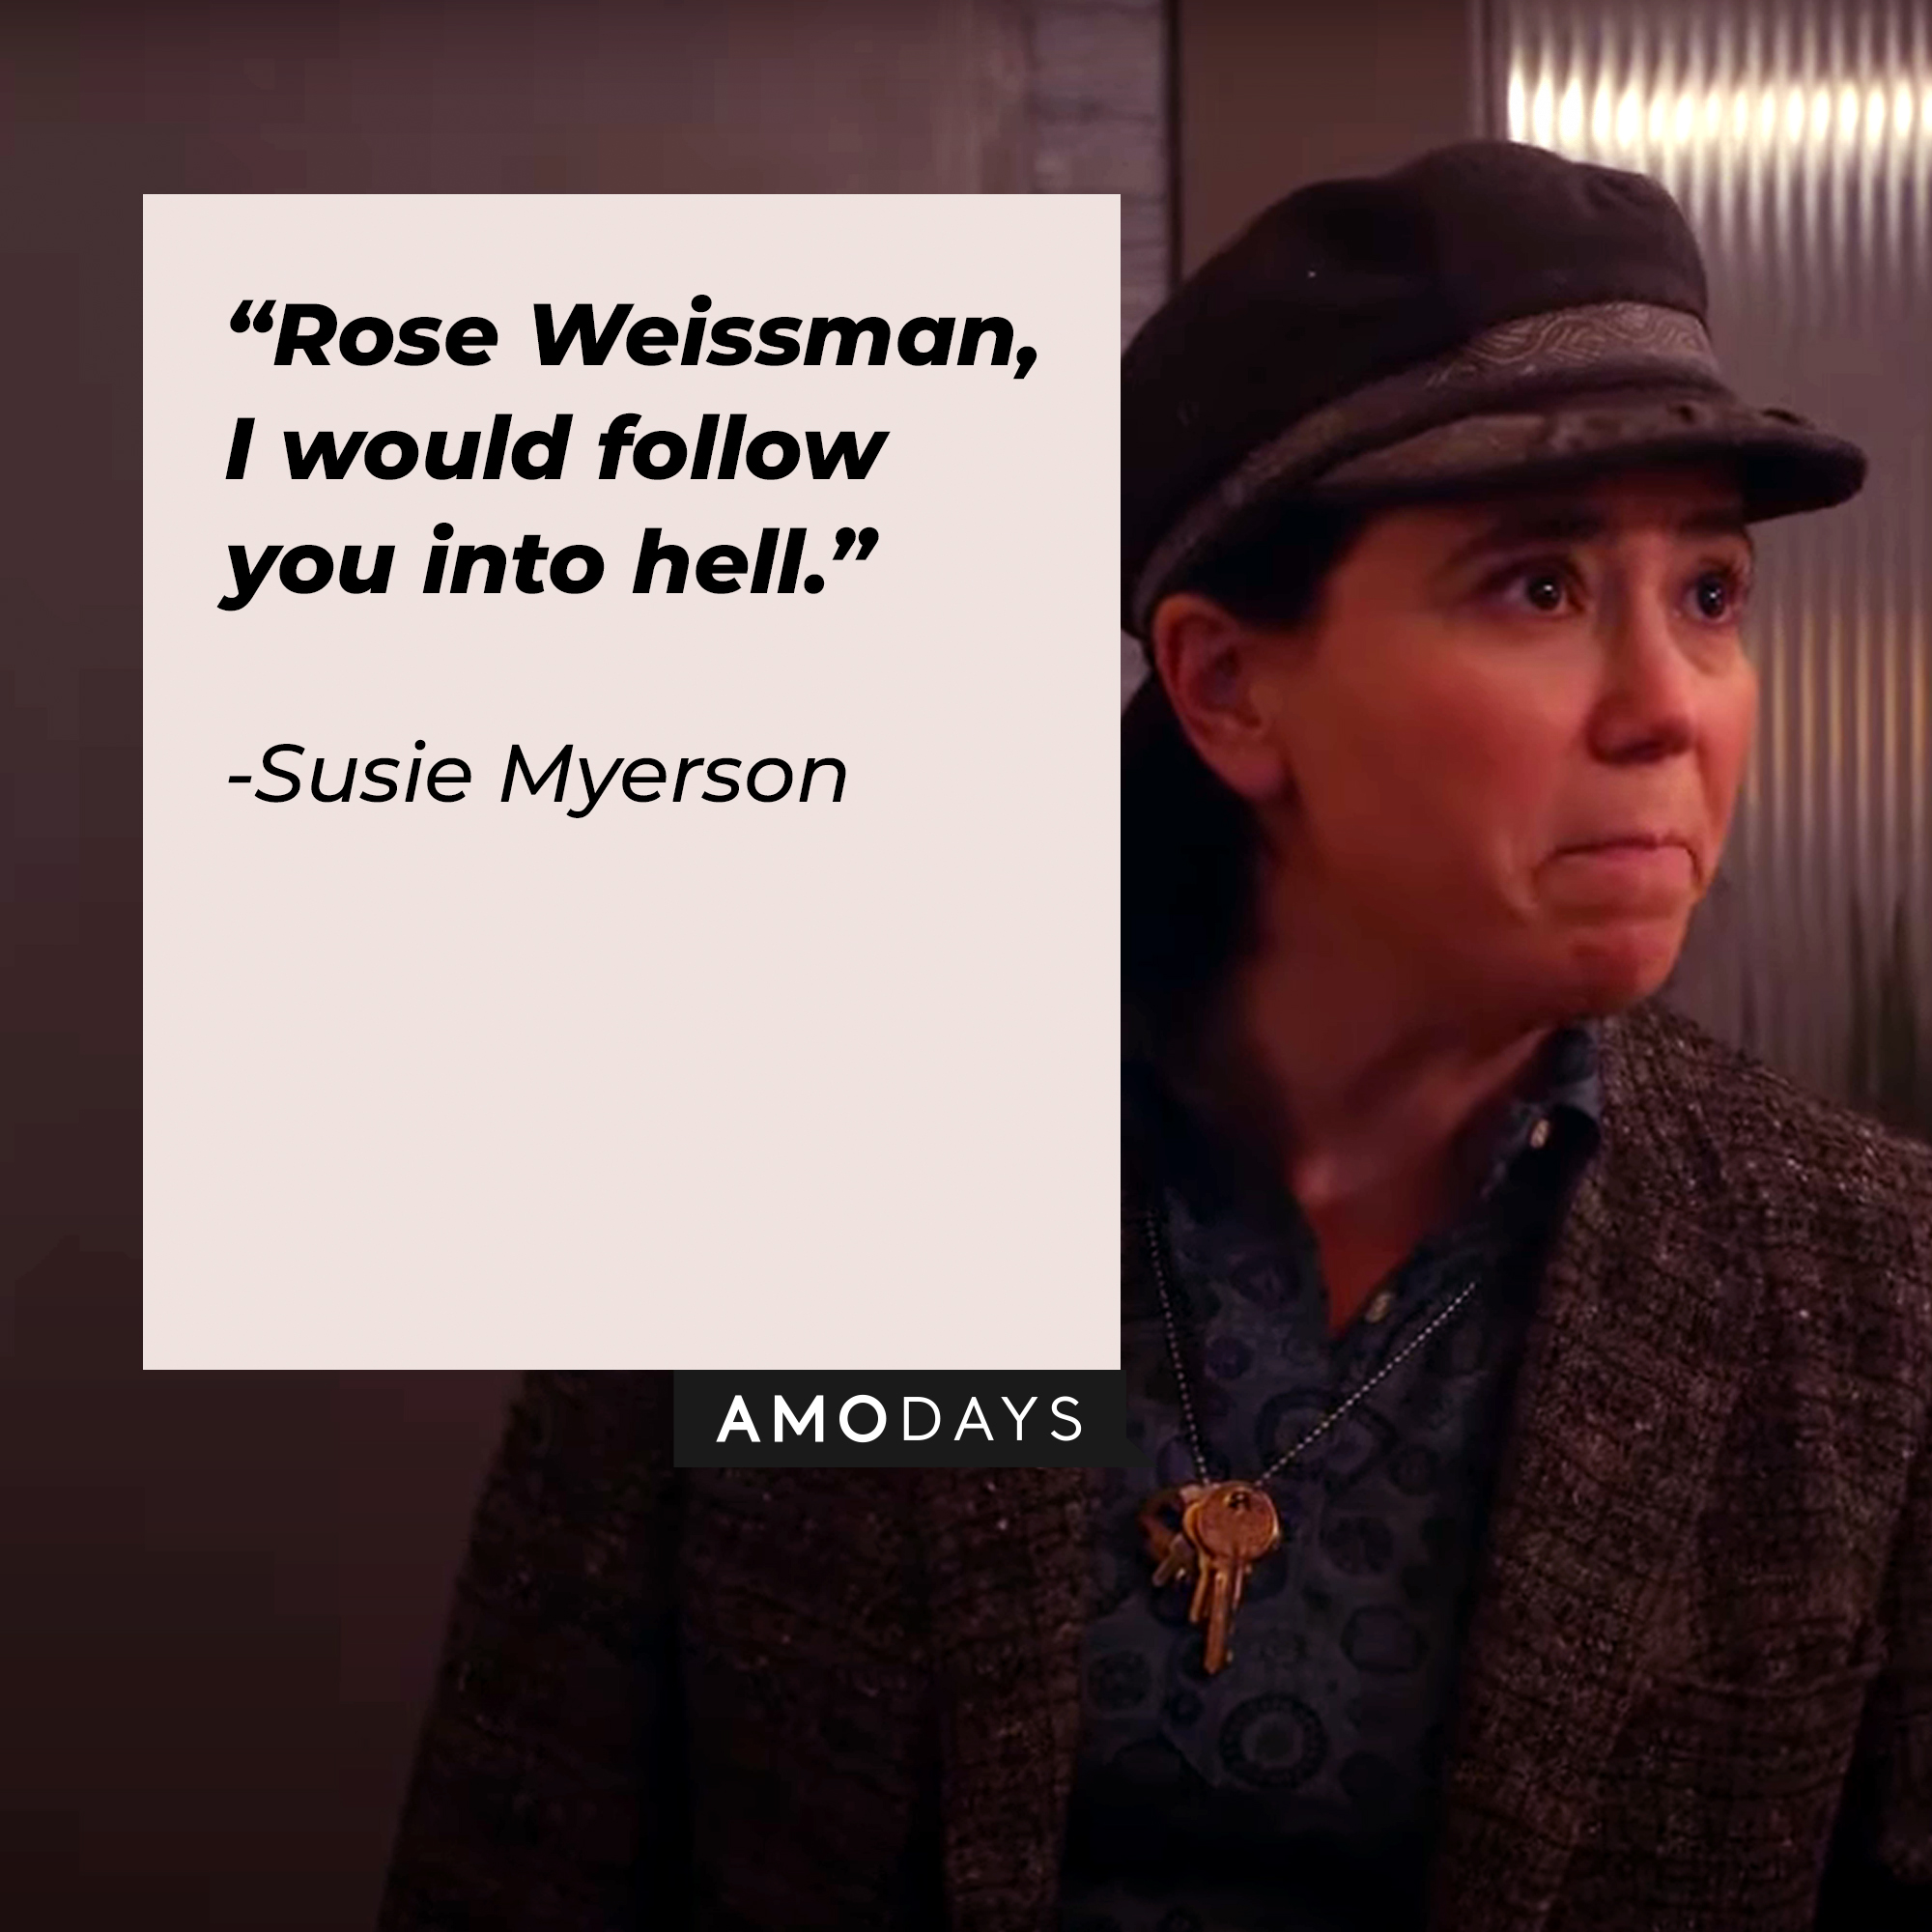 Susie Myerson with her quote: “Rose Weissman, I would follow you into hell.”  | Source: youtube.com/PrimeVideoUK